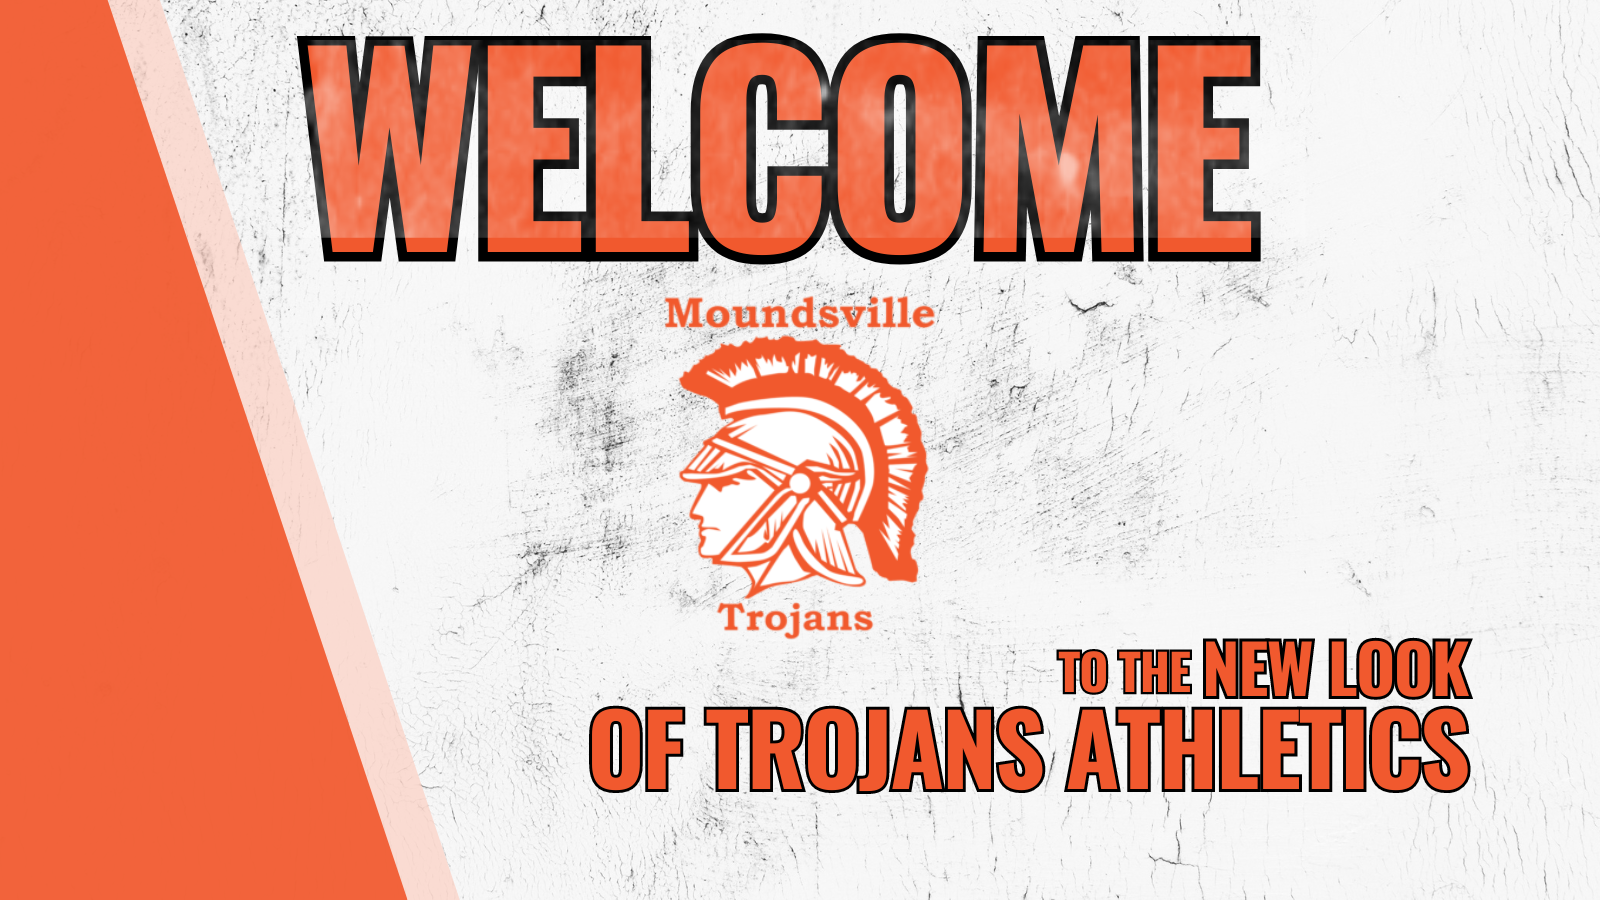 1710363929_CopyofOleyValleyWelcometo1280x320pxTwitterPost24.png - Image for 🎉 Exciting News for Trojans Athletics Fans! 🎉